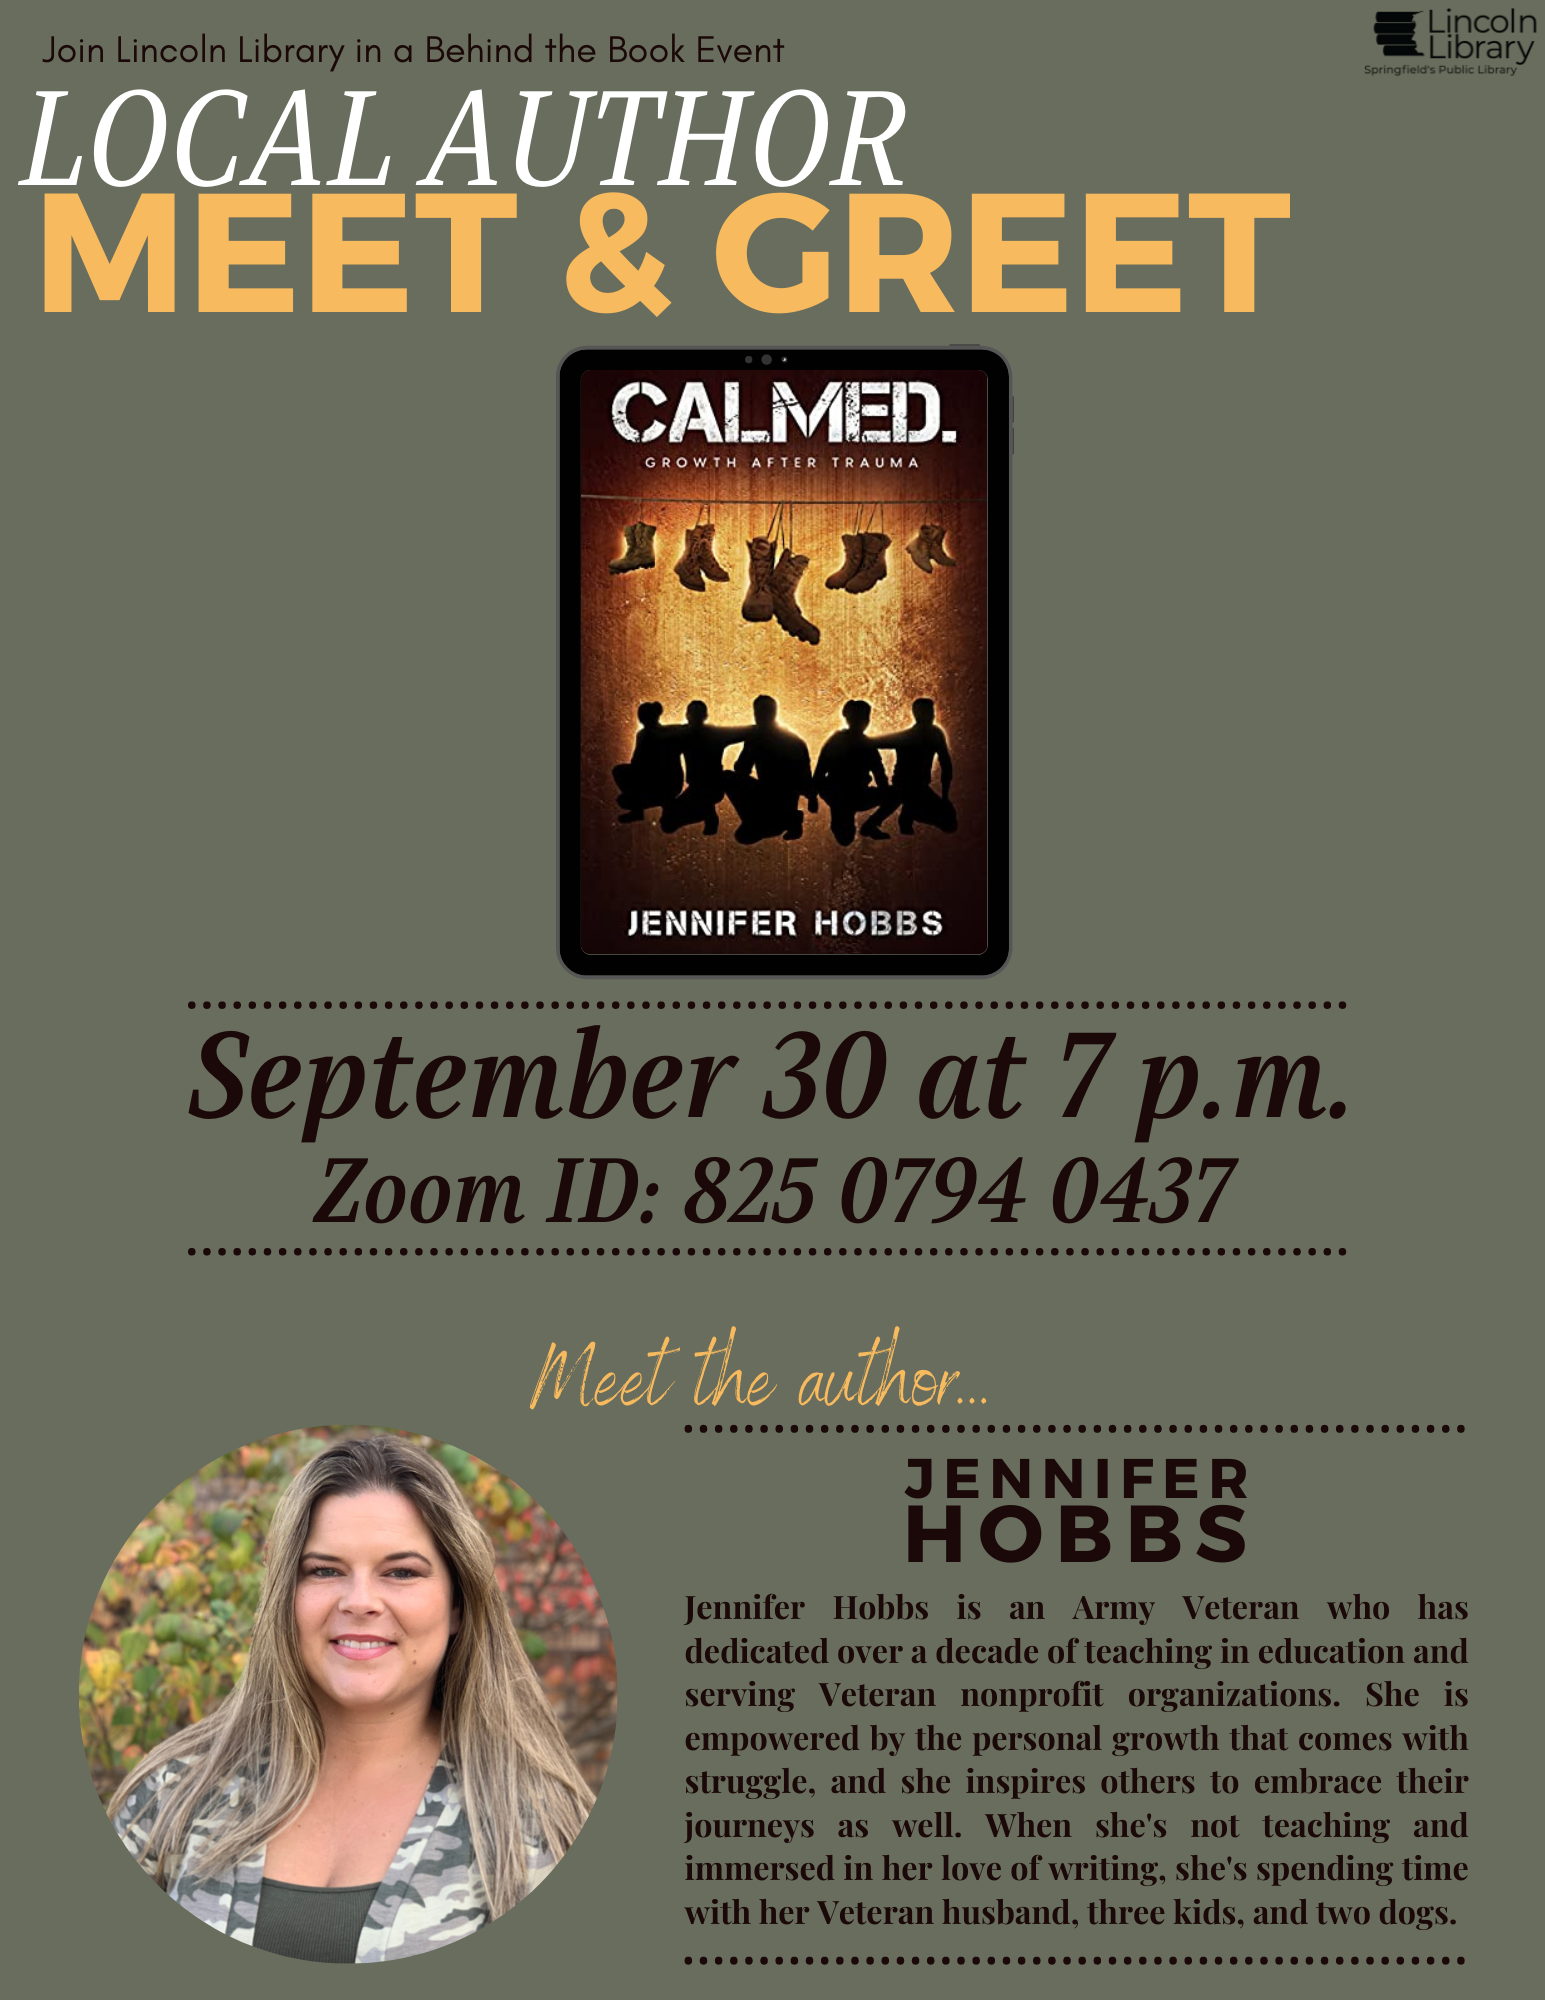 Local Author Meet and Greet with Jennifer Hobbs via Zoom